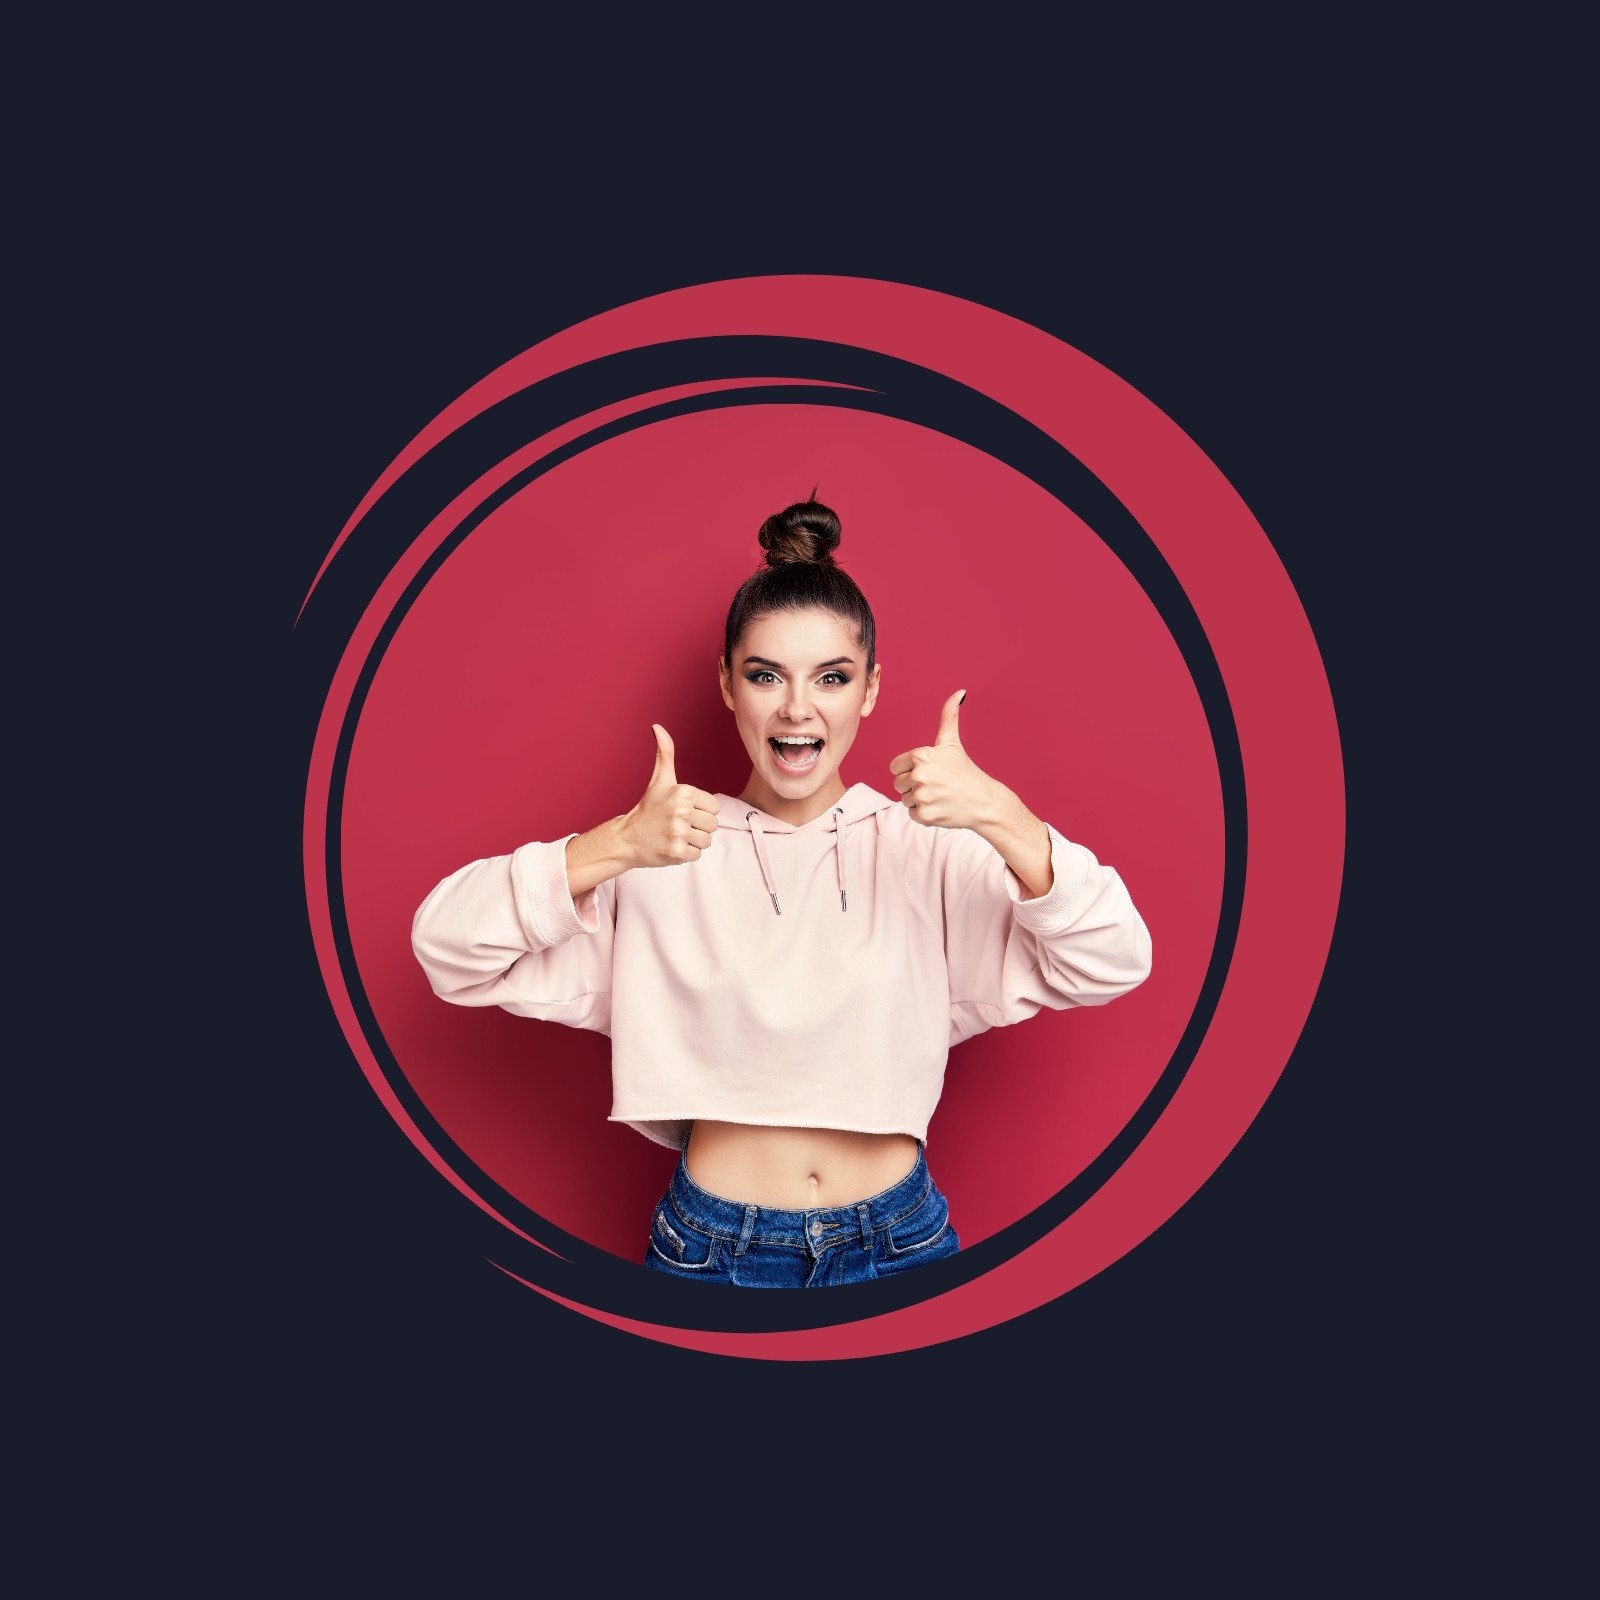 Red Circular Frame Modern Woman Facebook Profile Picture